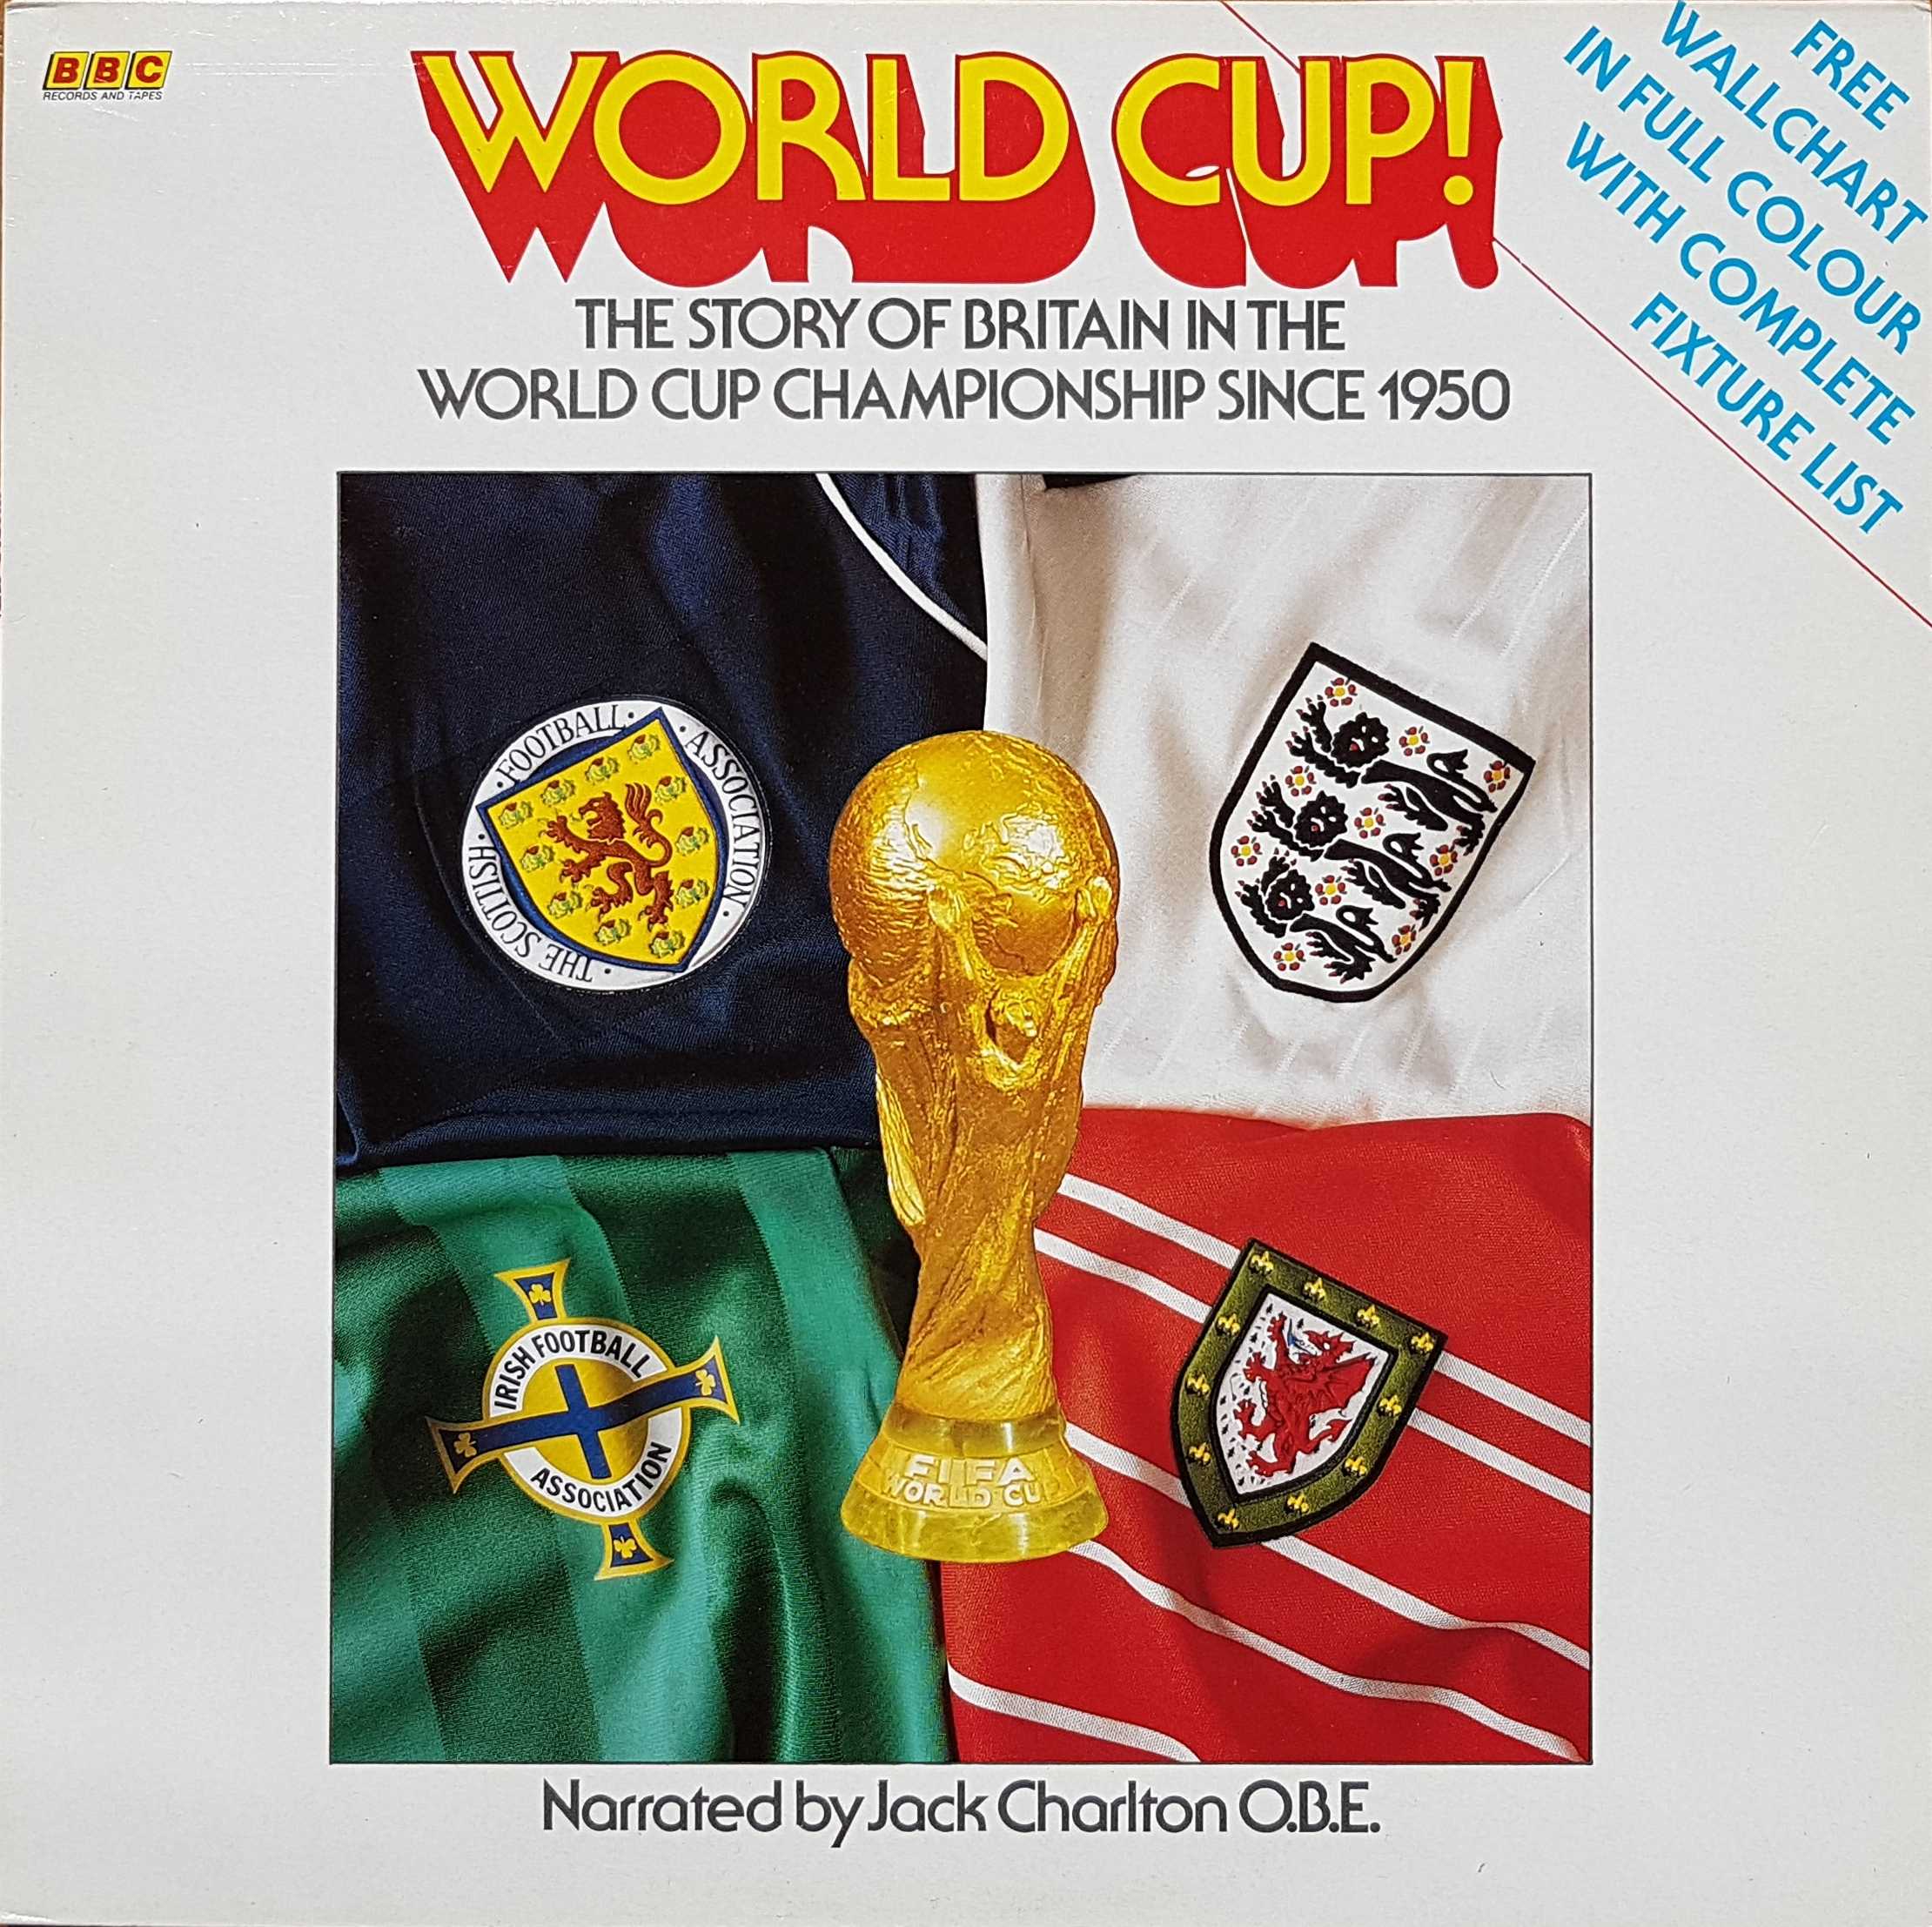 Picture of REC 592 World cup ! by artist Various from the BBC albums - Records and Tapes library